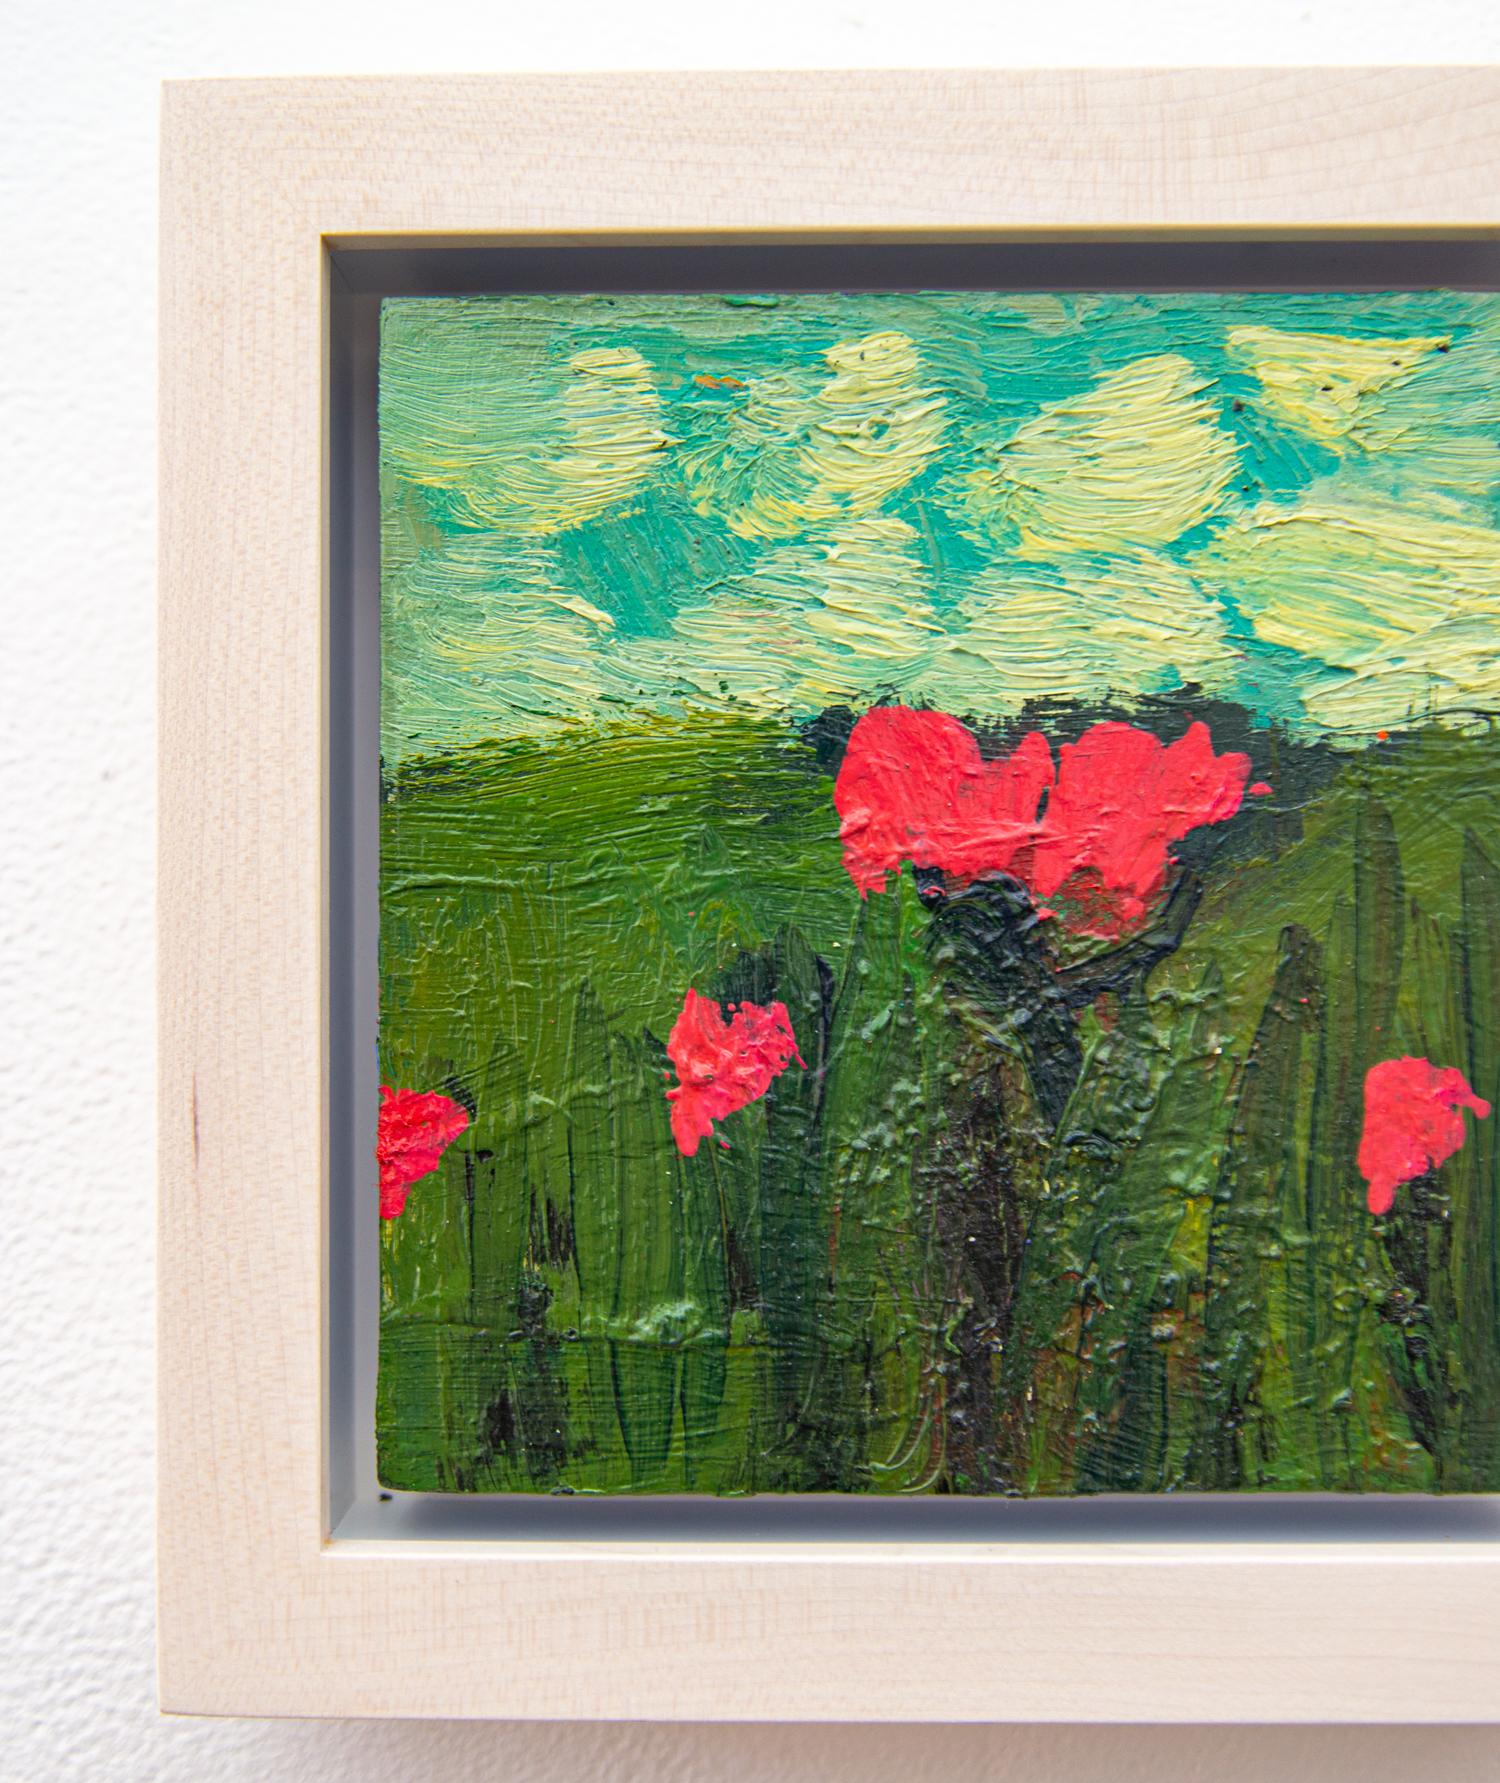 In this lovely oil painting by Jennifer Hornyak, bright red flowers—perhaps poppies stand in a field of green. Billowy white clouds in a turquoise-blue sky frame the flowers and offer stunning contrast. Hornyak is known for her abstract and